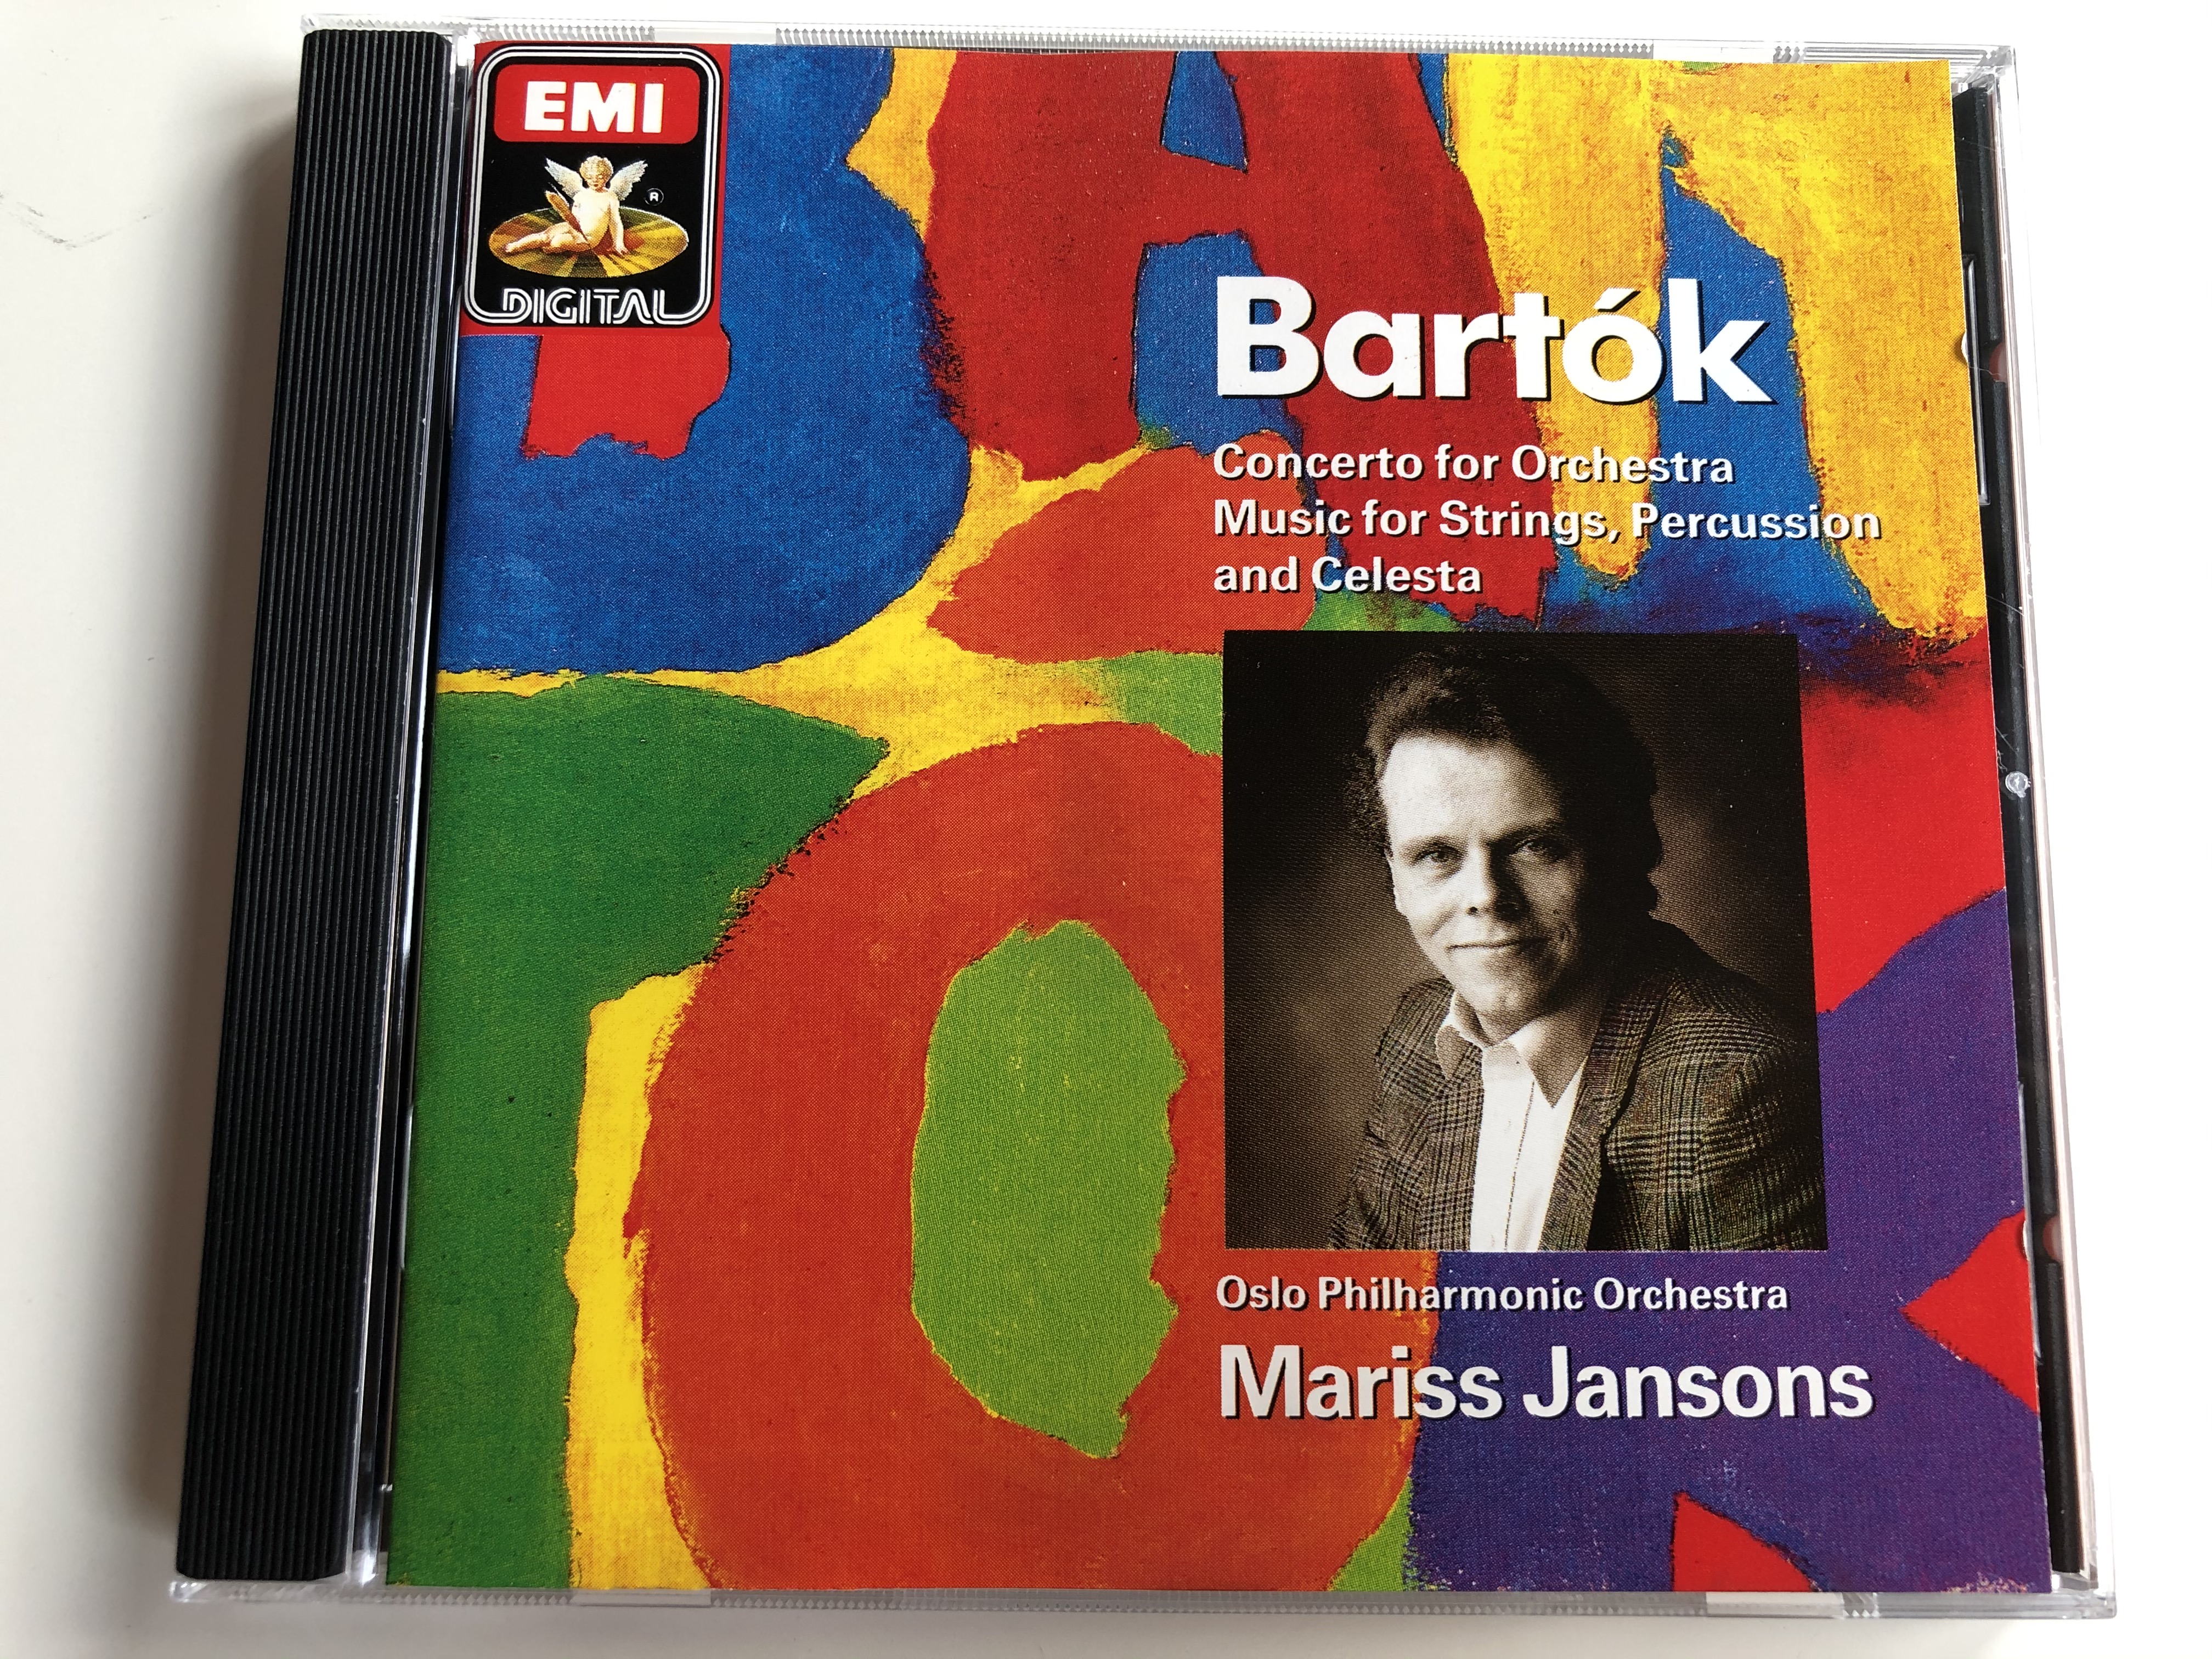 bart-k-concerto-for-orchestra-music-for-strings-percussion-and-celesta-oslo-philharmonic-orchestra-mariss-jansons-emi-digital-audio-cd-1990-stereo-cdc-7-54070-2-1-.jpg